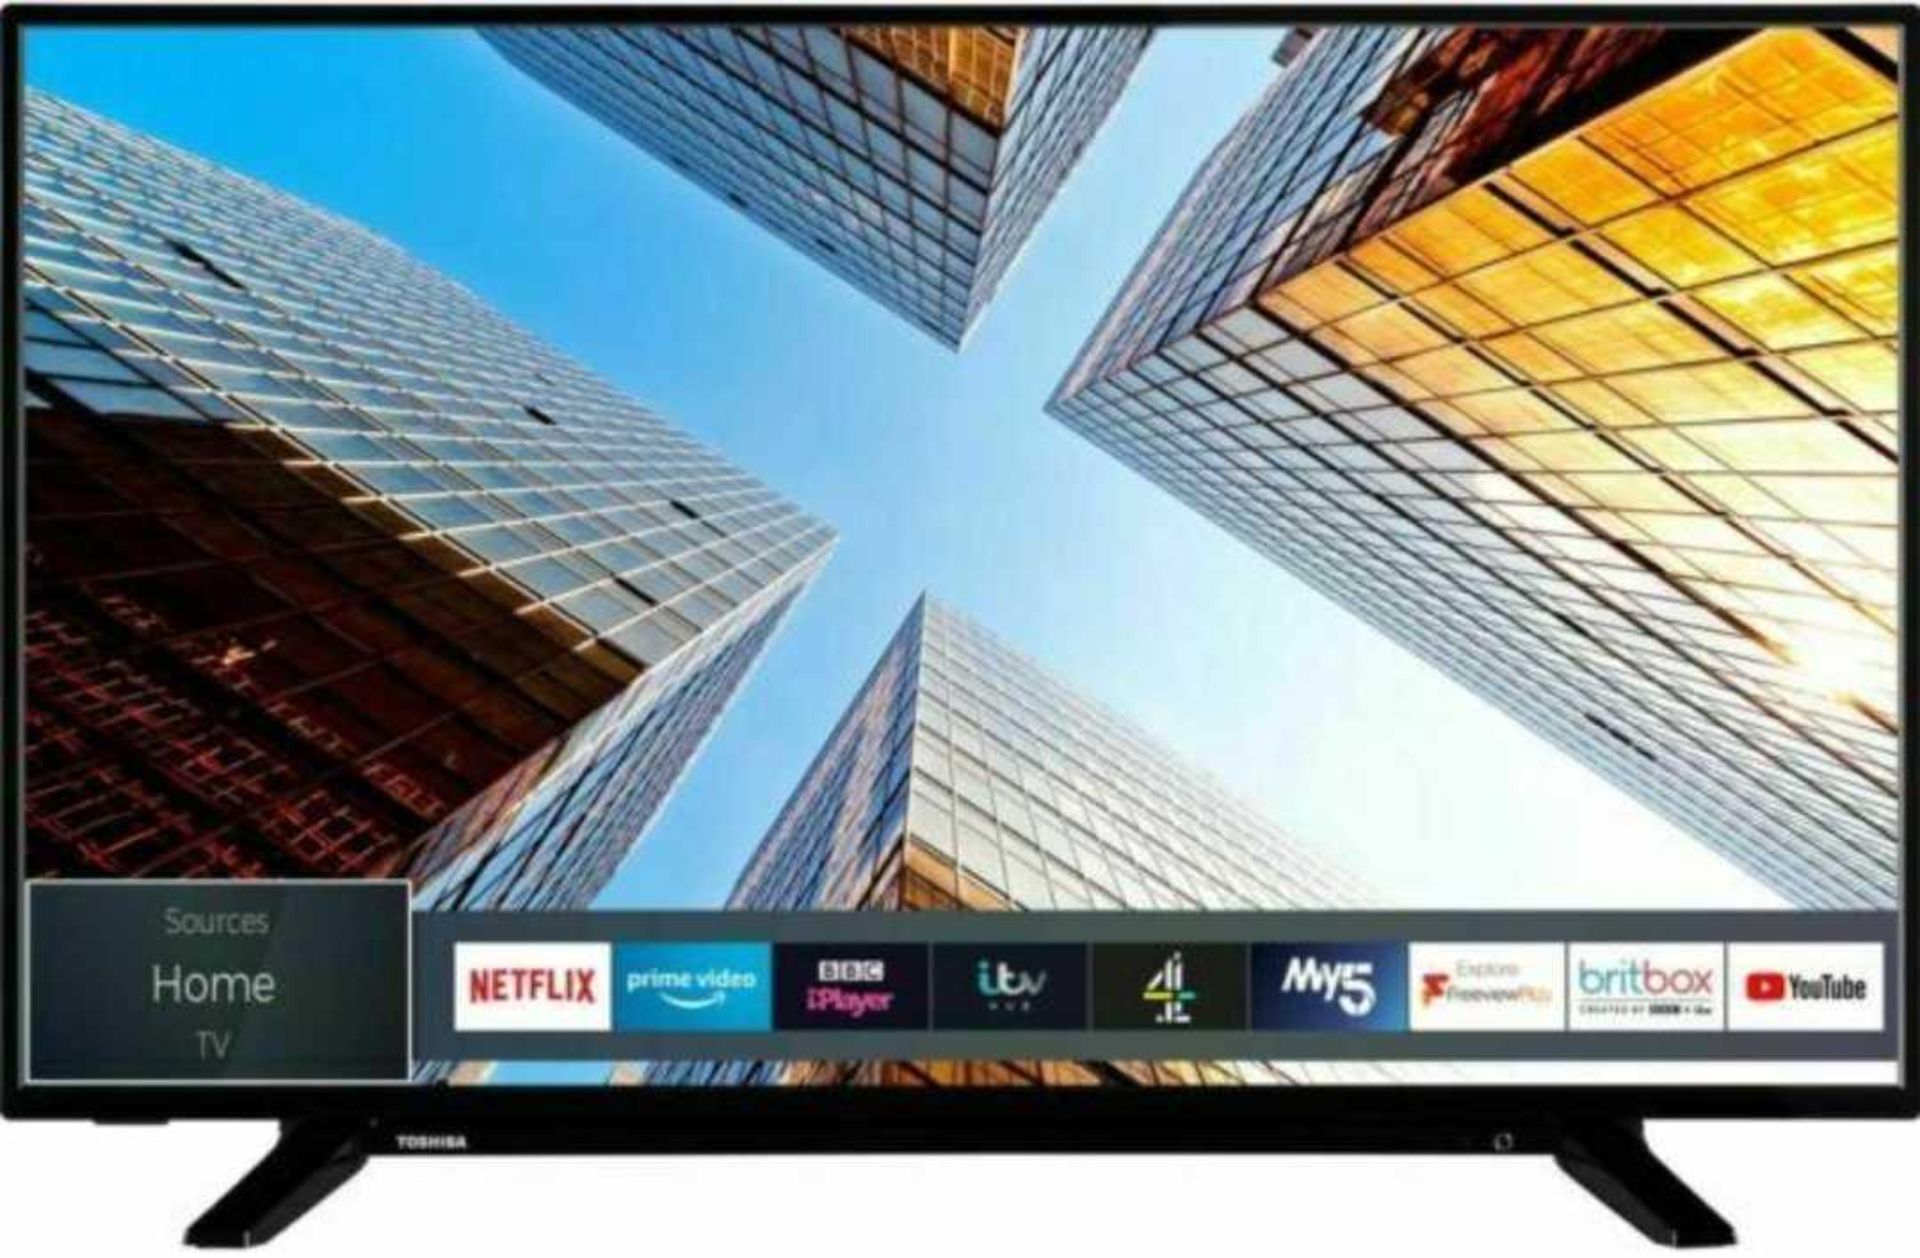 RRP £230 Boxed Toshiba 43Inch Led Backlight Smart Tv - Image 2 of 4